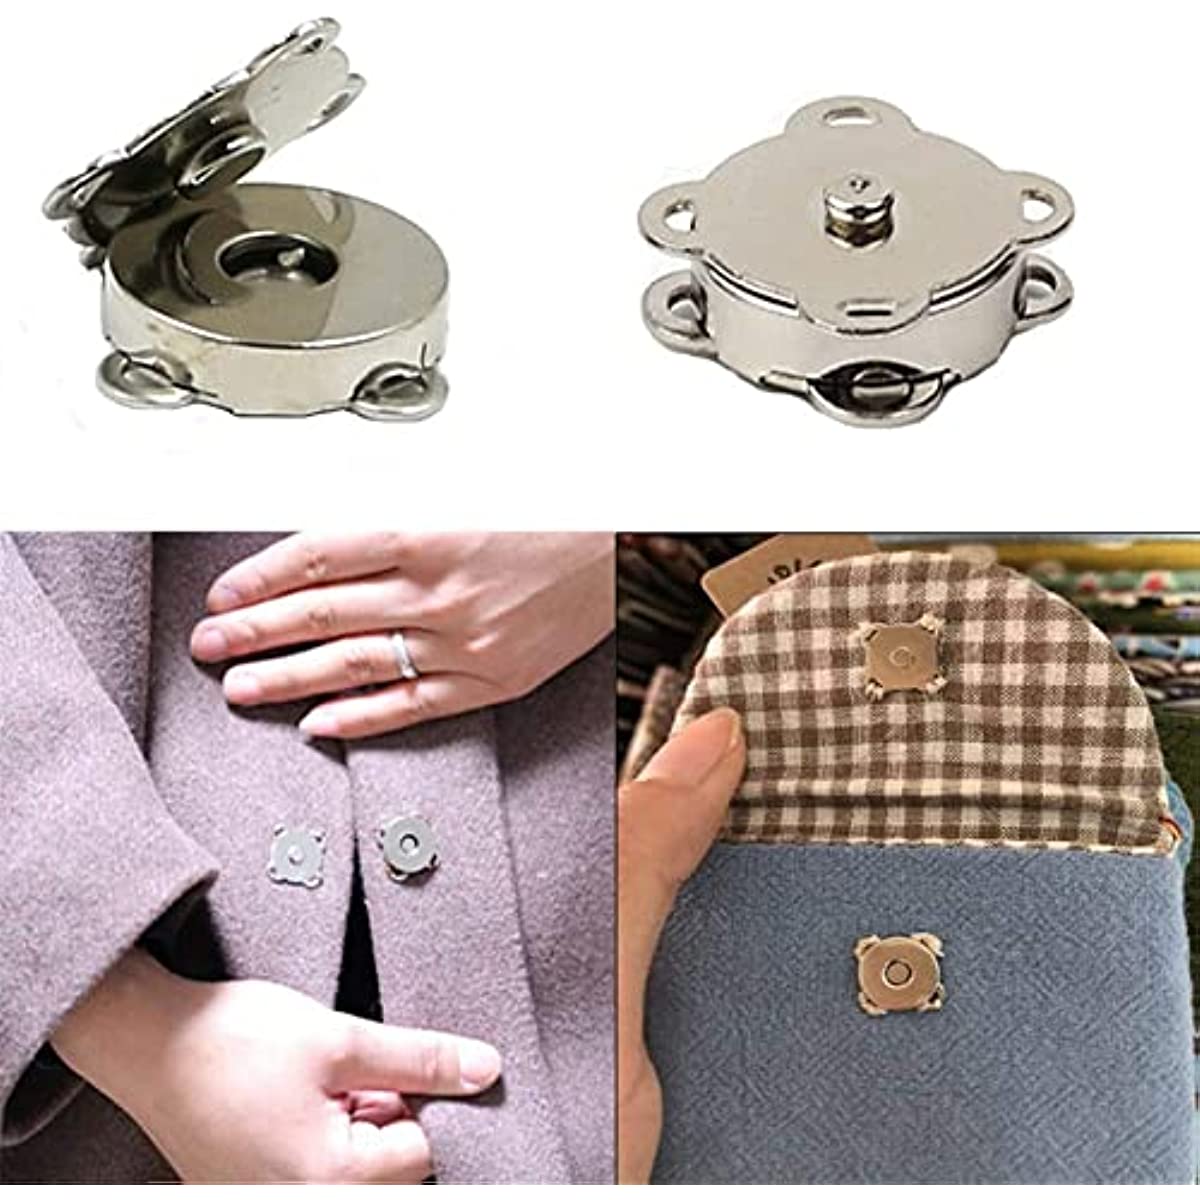 Magnetic Purse Love Snap 3/4 18mm Clasps Closure Purse Handbag With Washer  Nickle - Buy Magnetic Purse Love Snap 3/4 18mm Clasps Closure Purse Handbag  With Washer Nickle Product on